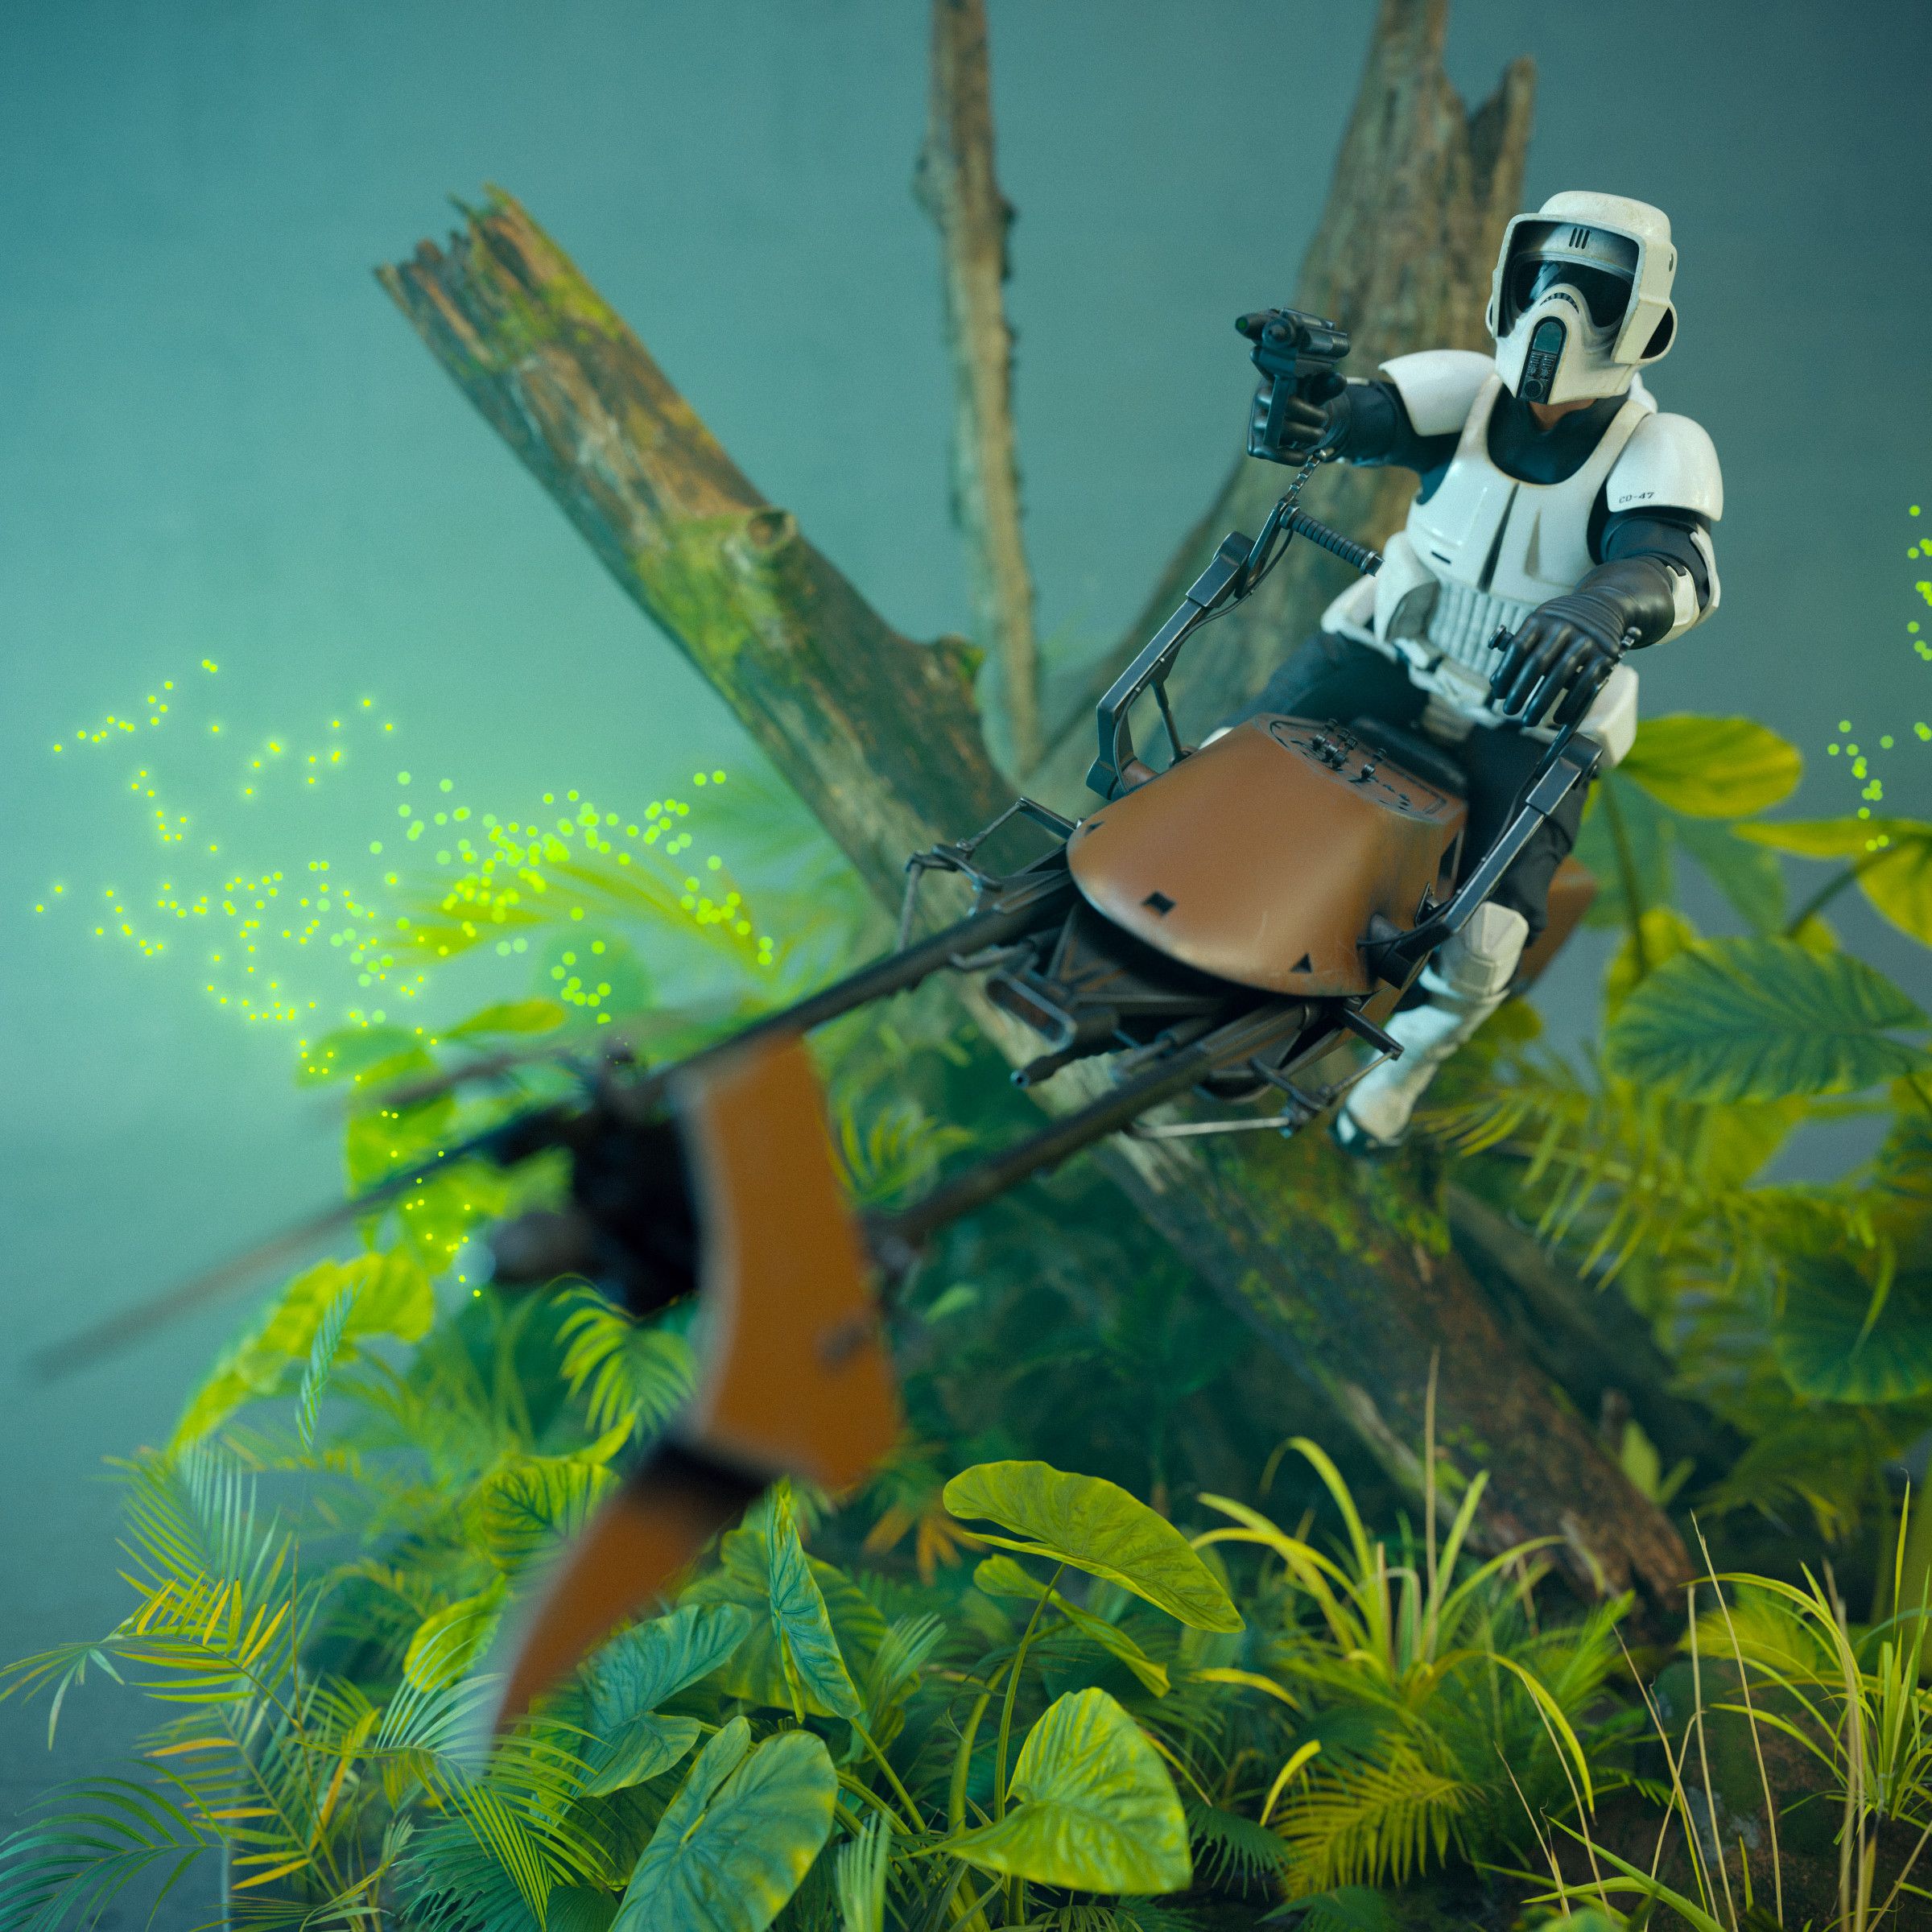 Speeder Bike Scout Trooper Star Wars Imperial Forces Toys Action Figures Wallpaper:2400x2400